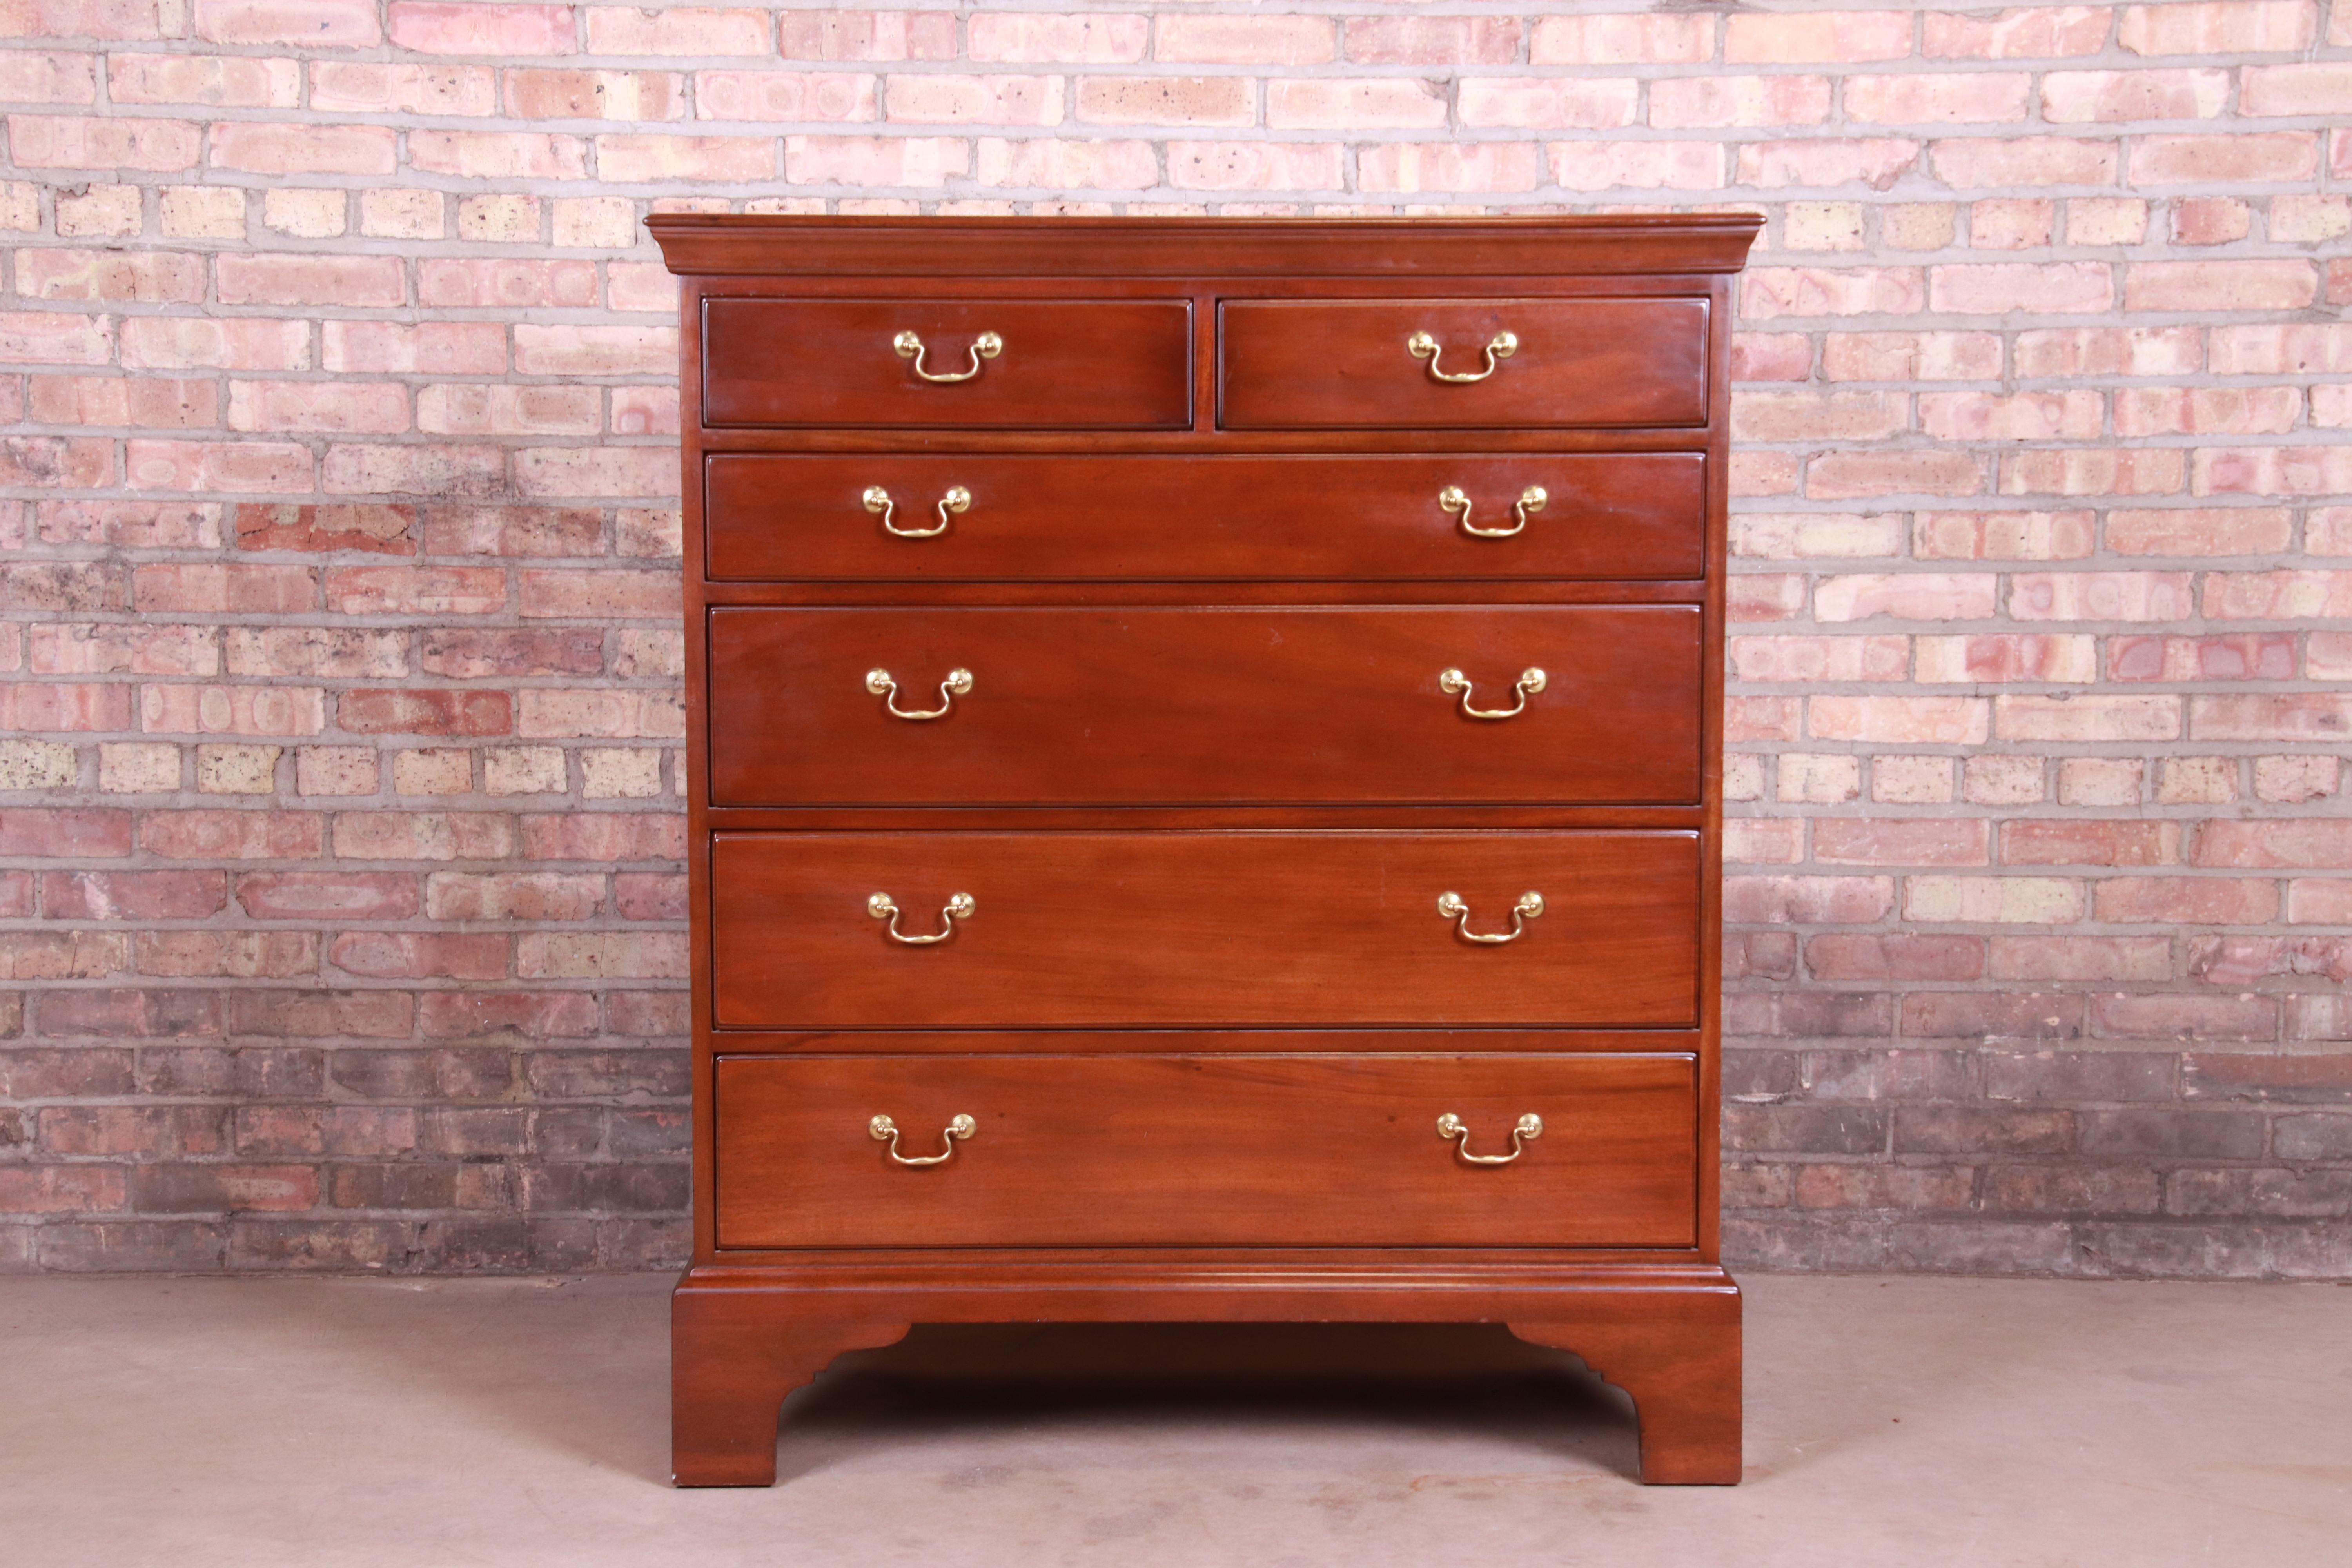 A gorgeous Georgian style six-drawer highboy dresser or chest of drawers

By Kittinger 